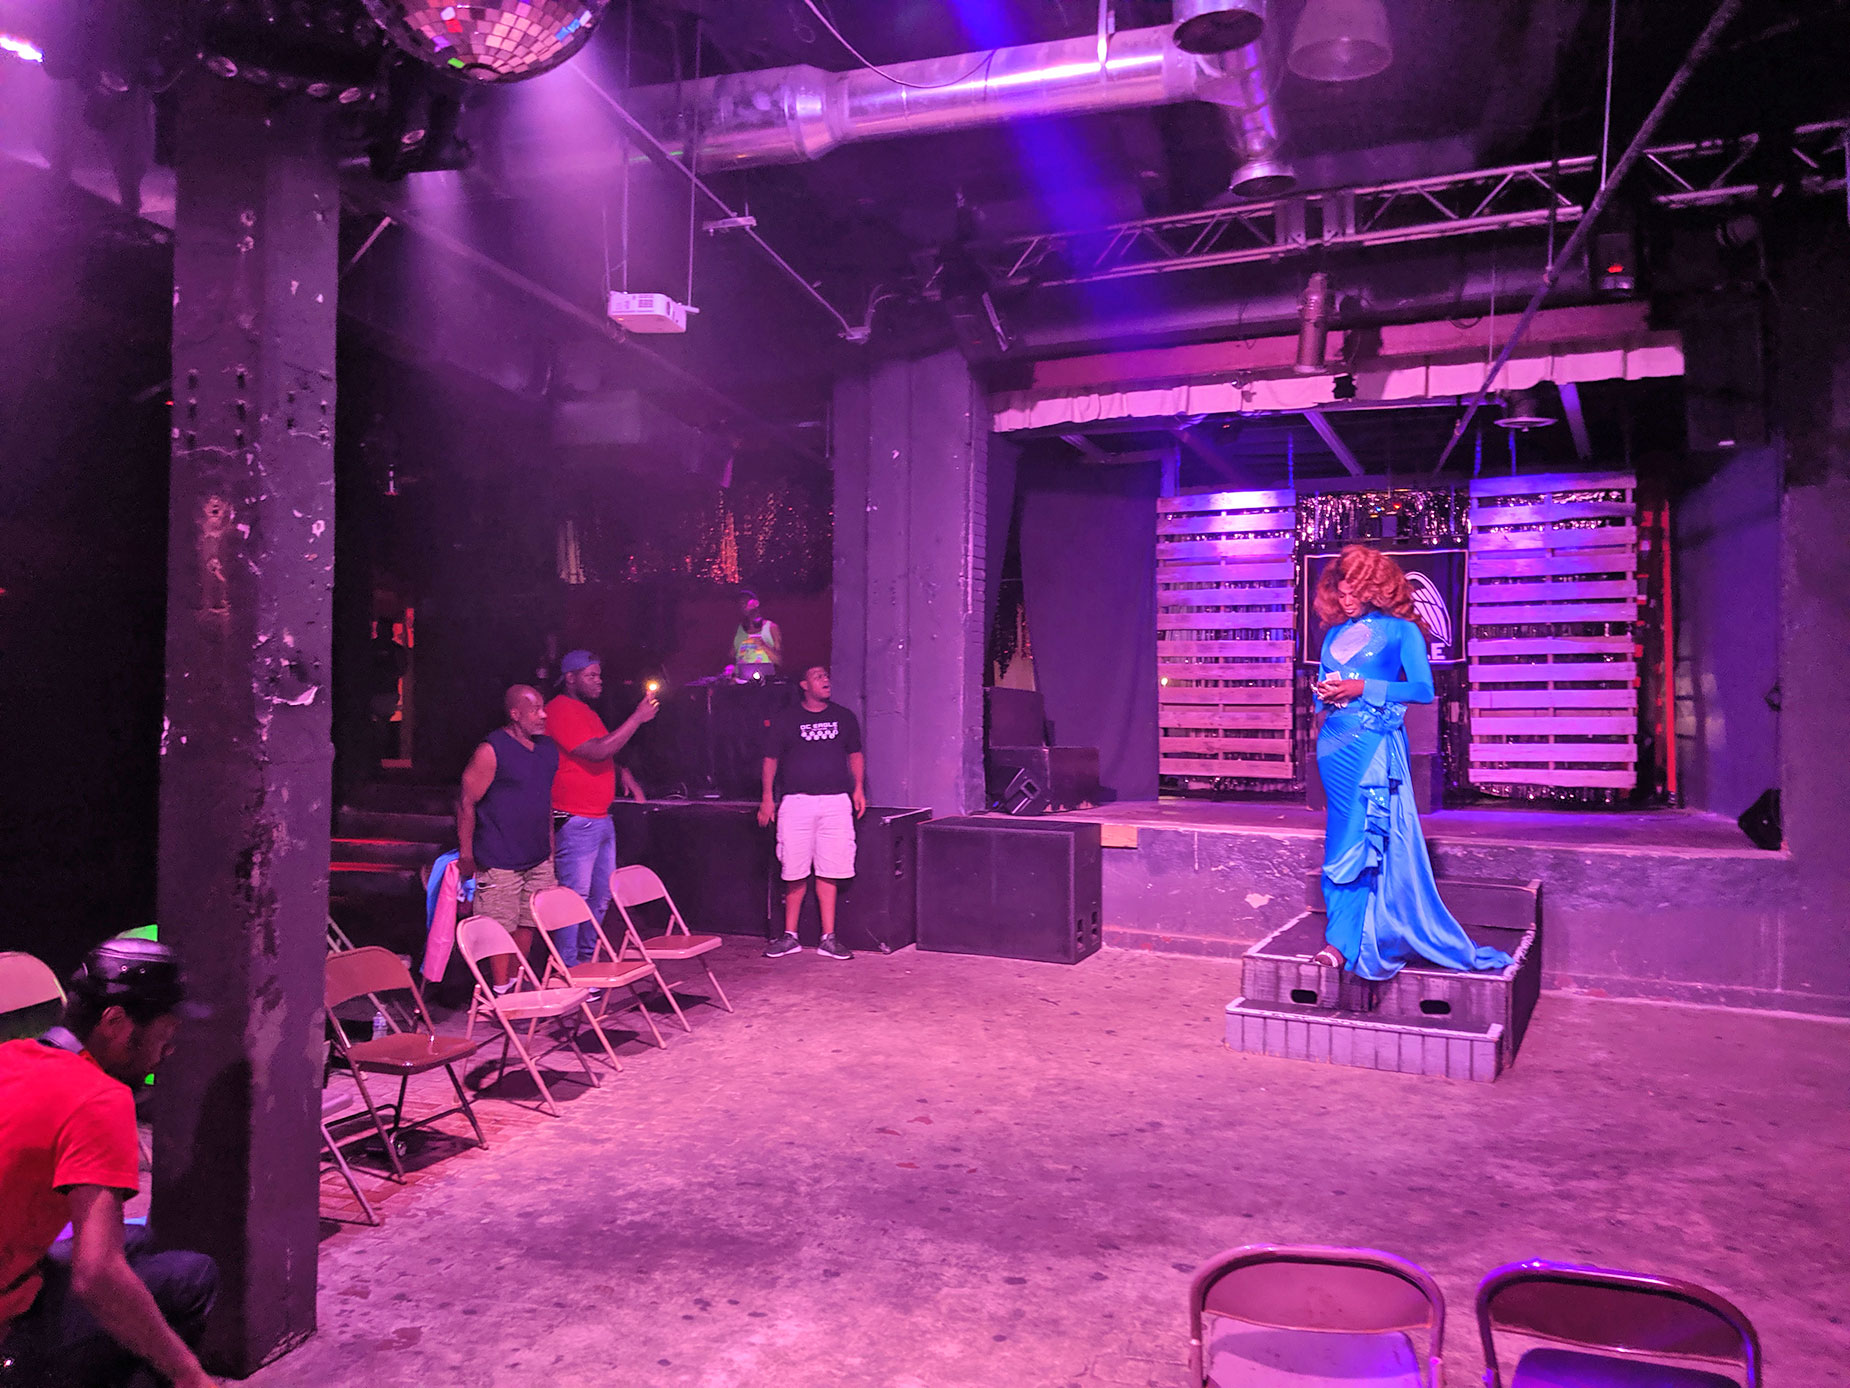 Many drag nights at the D.C. Eagle were poorly attended.